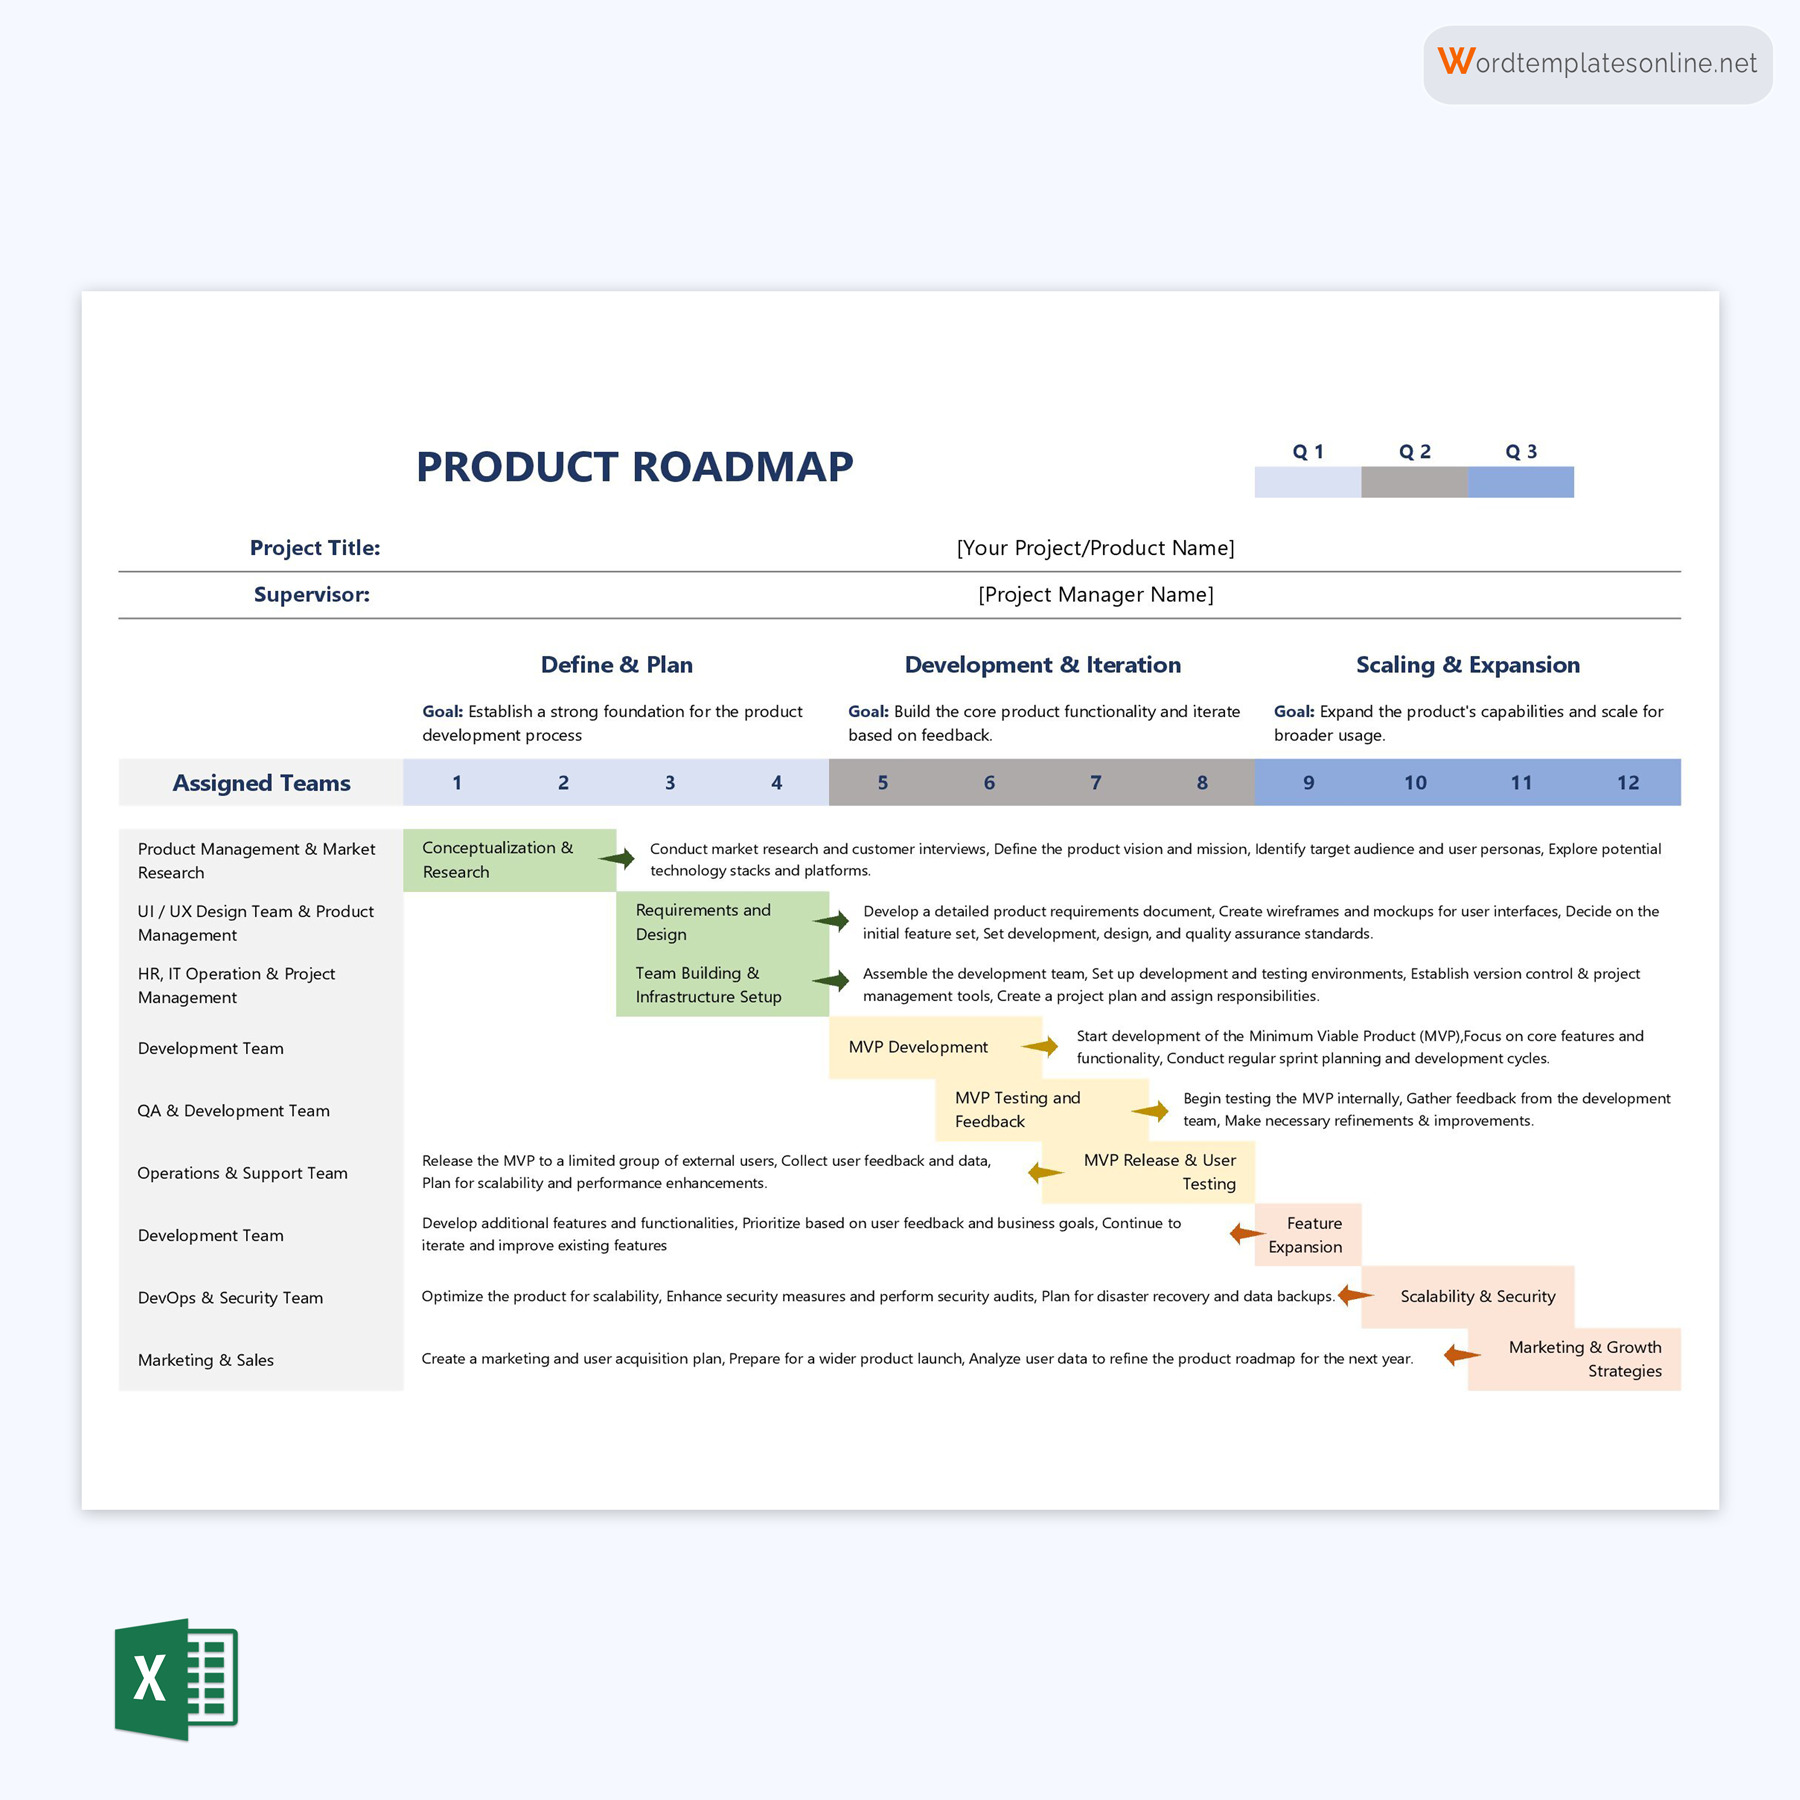 Free Printable Product Roadmap Template as Excel Sheet